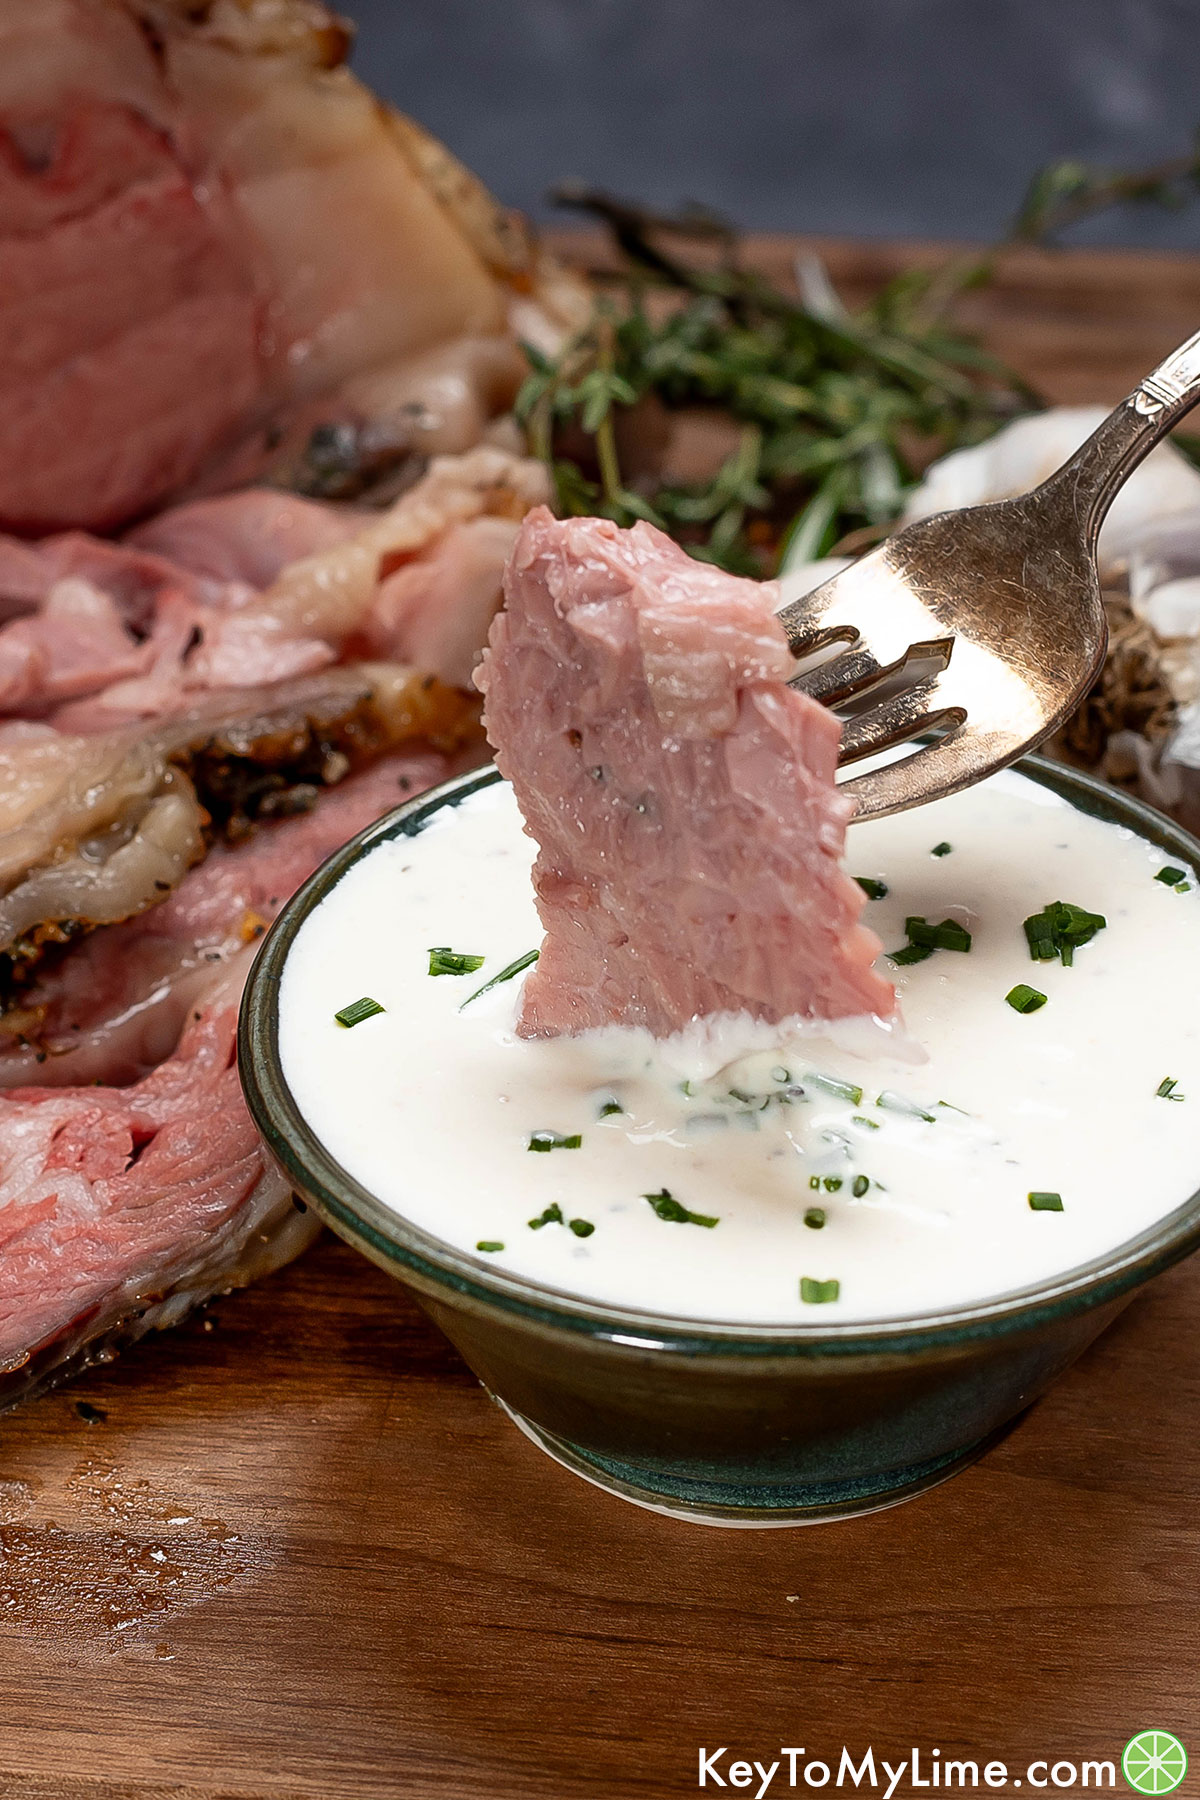 A forkful of prime rib being dipped in freshly made horseradish sauce.